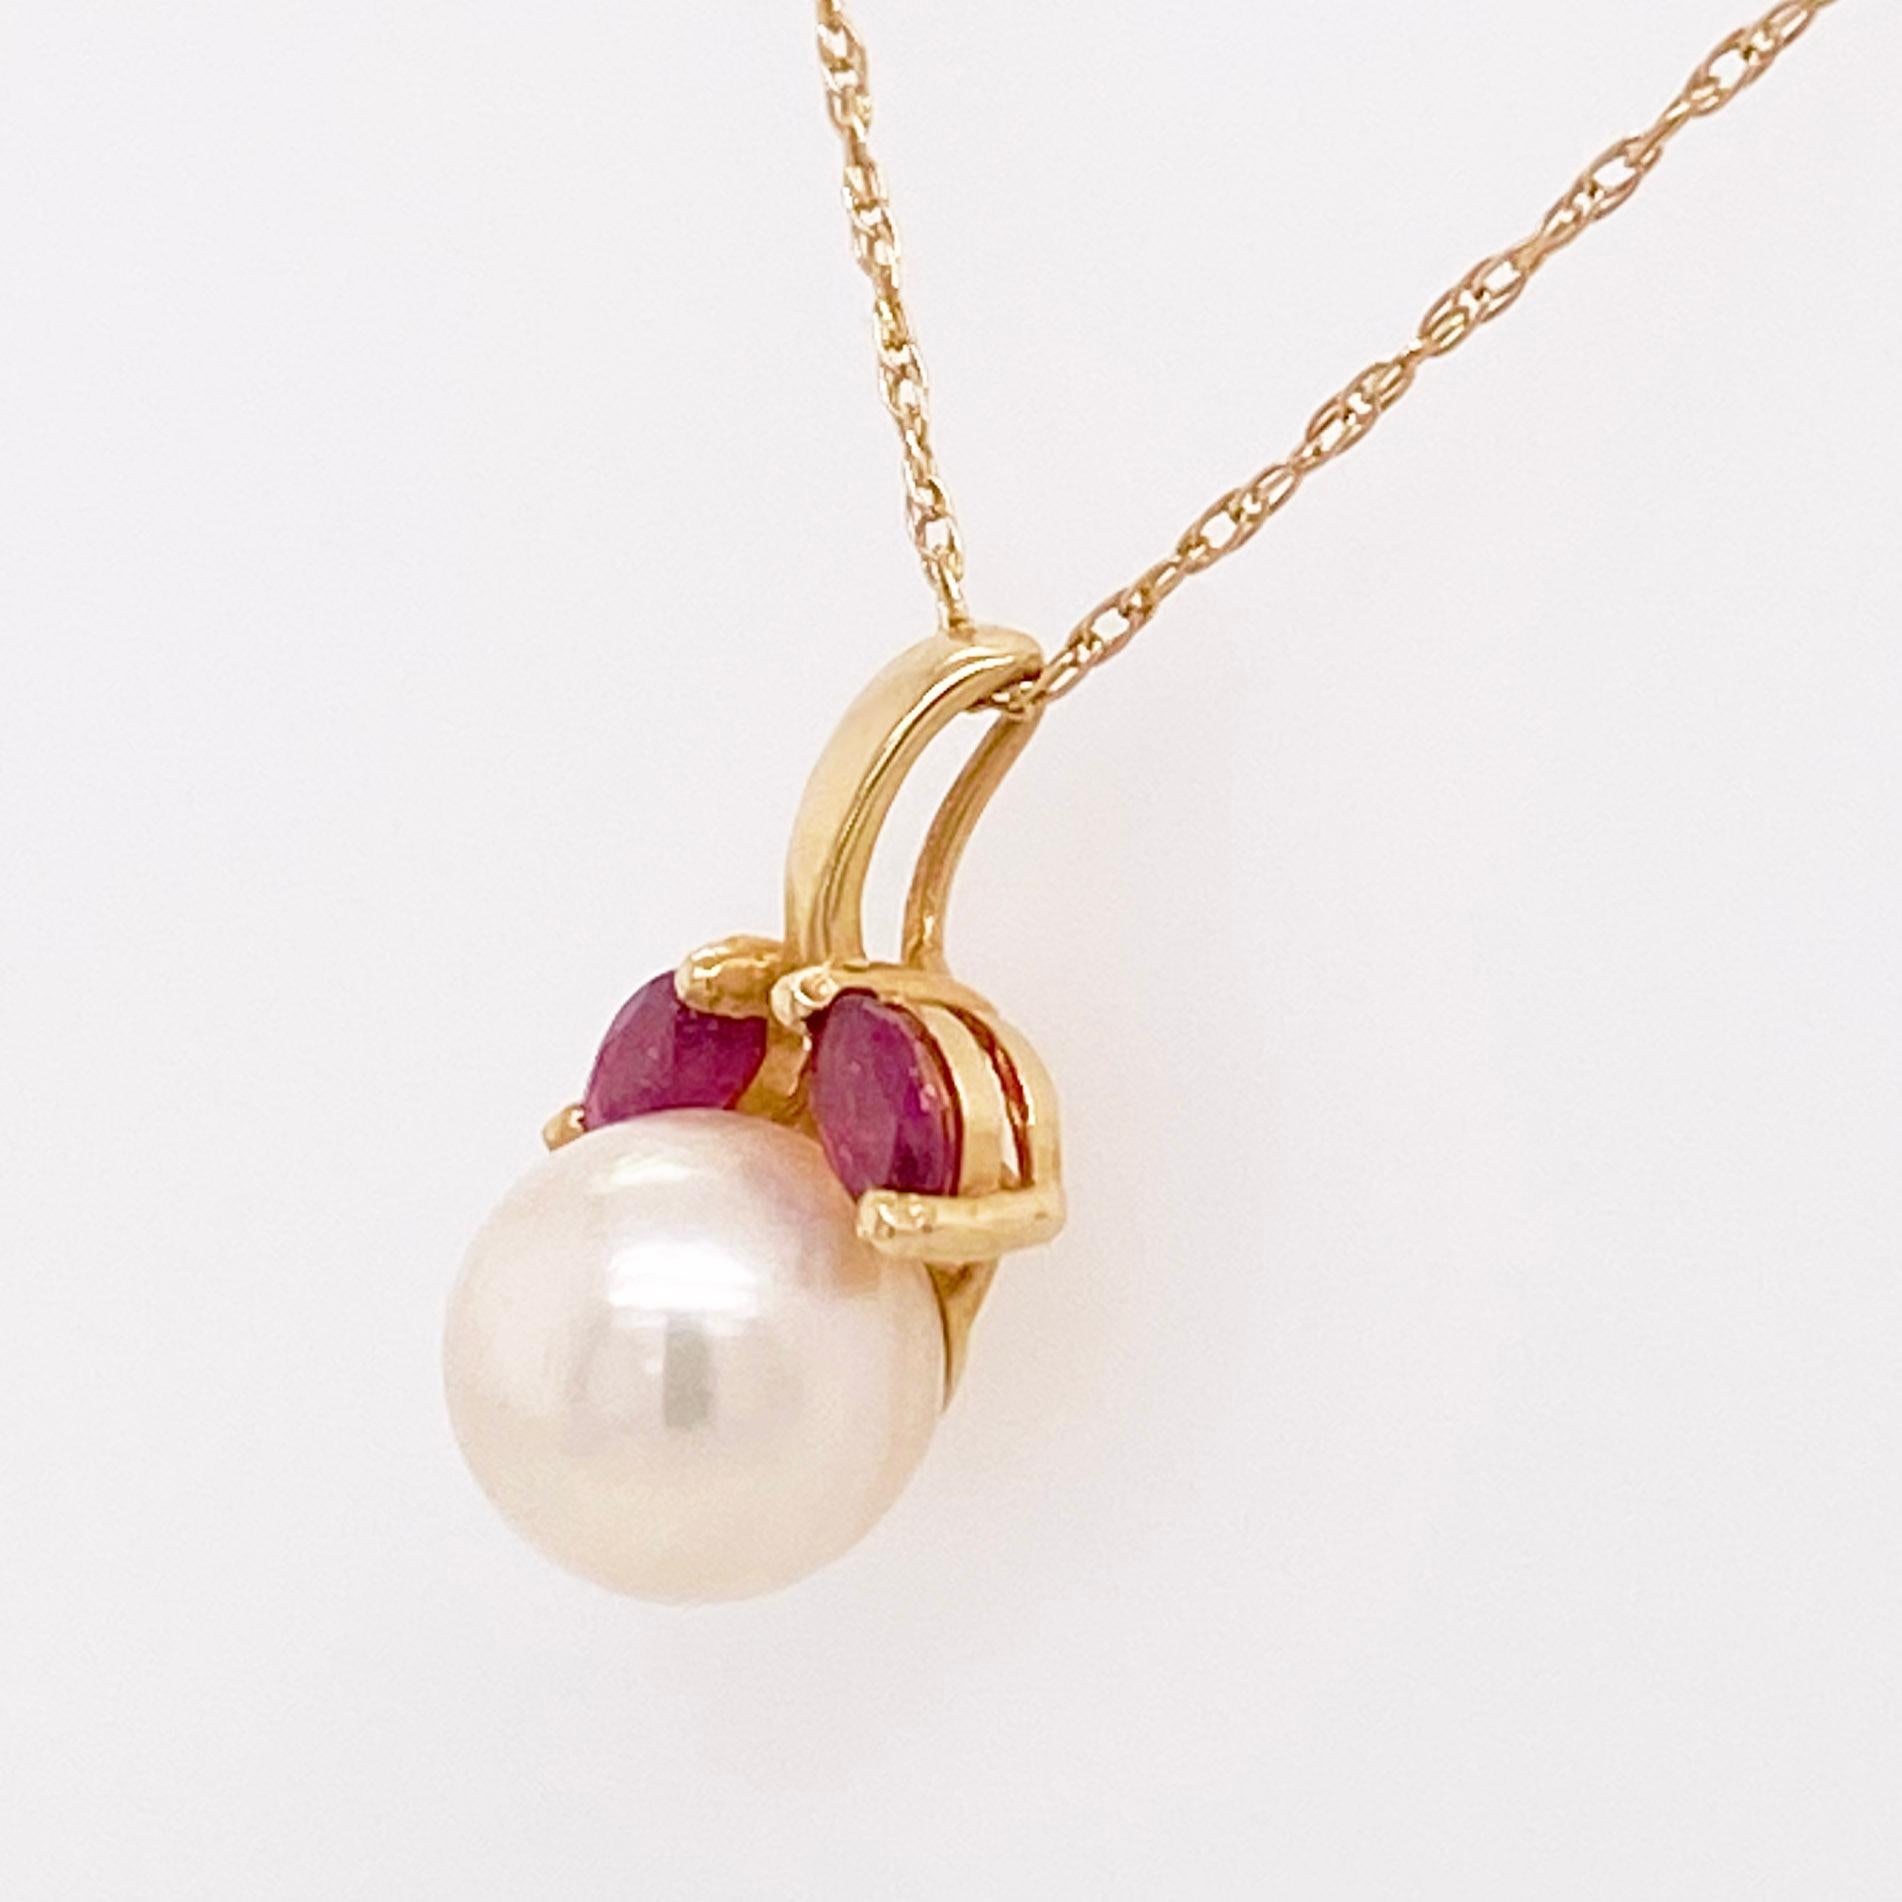 pearl necklace with ruby pendant